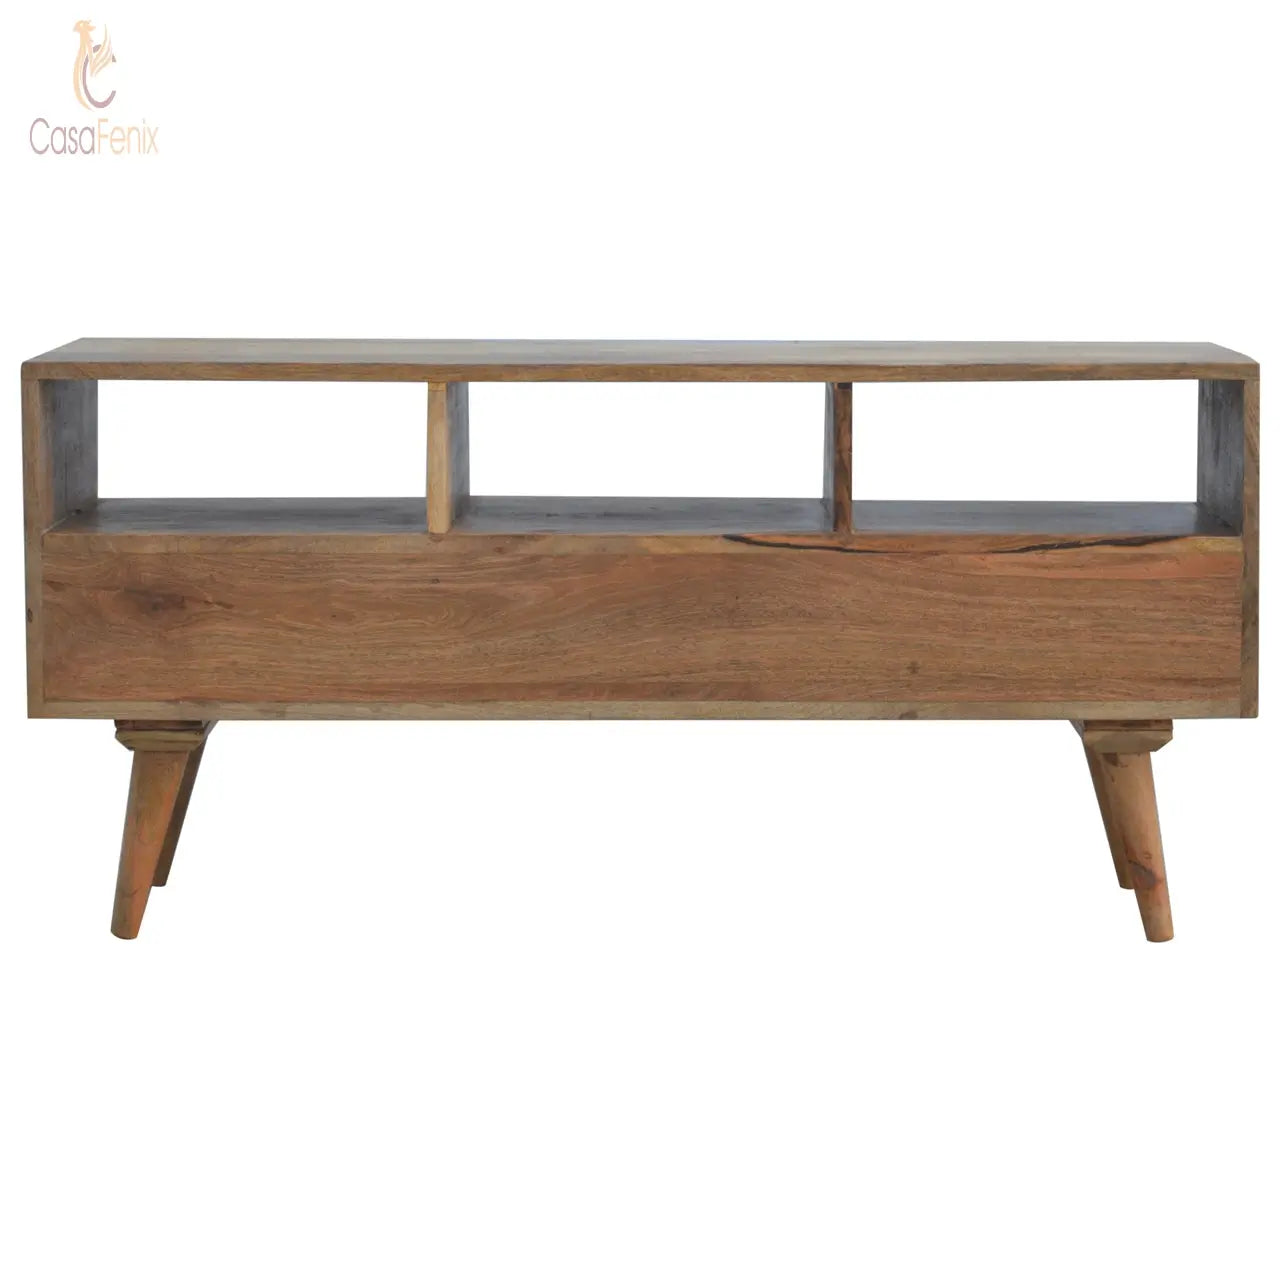 Nordic Style TV Unit with 3 Drawers 100% solid mango wood, in a fine oak-ish finish - CasaFenix